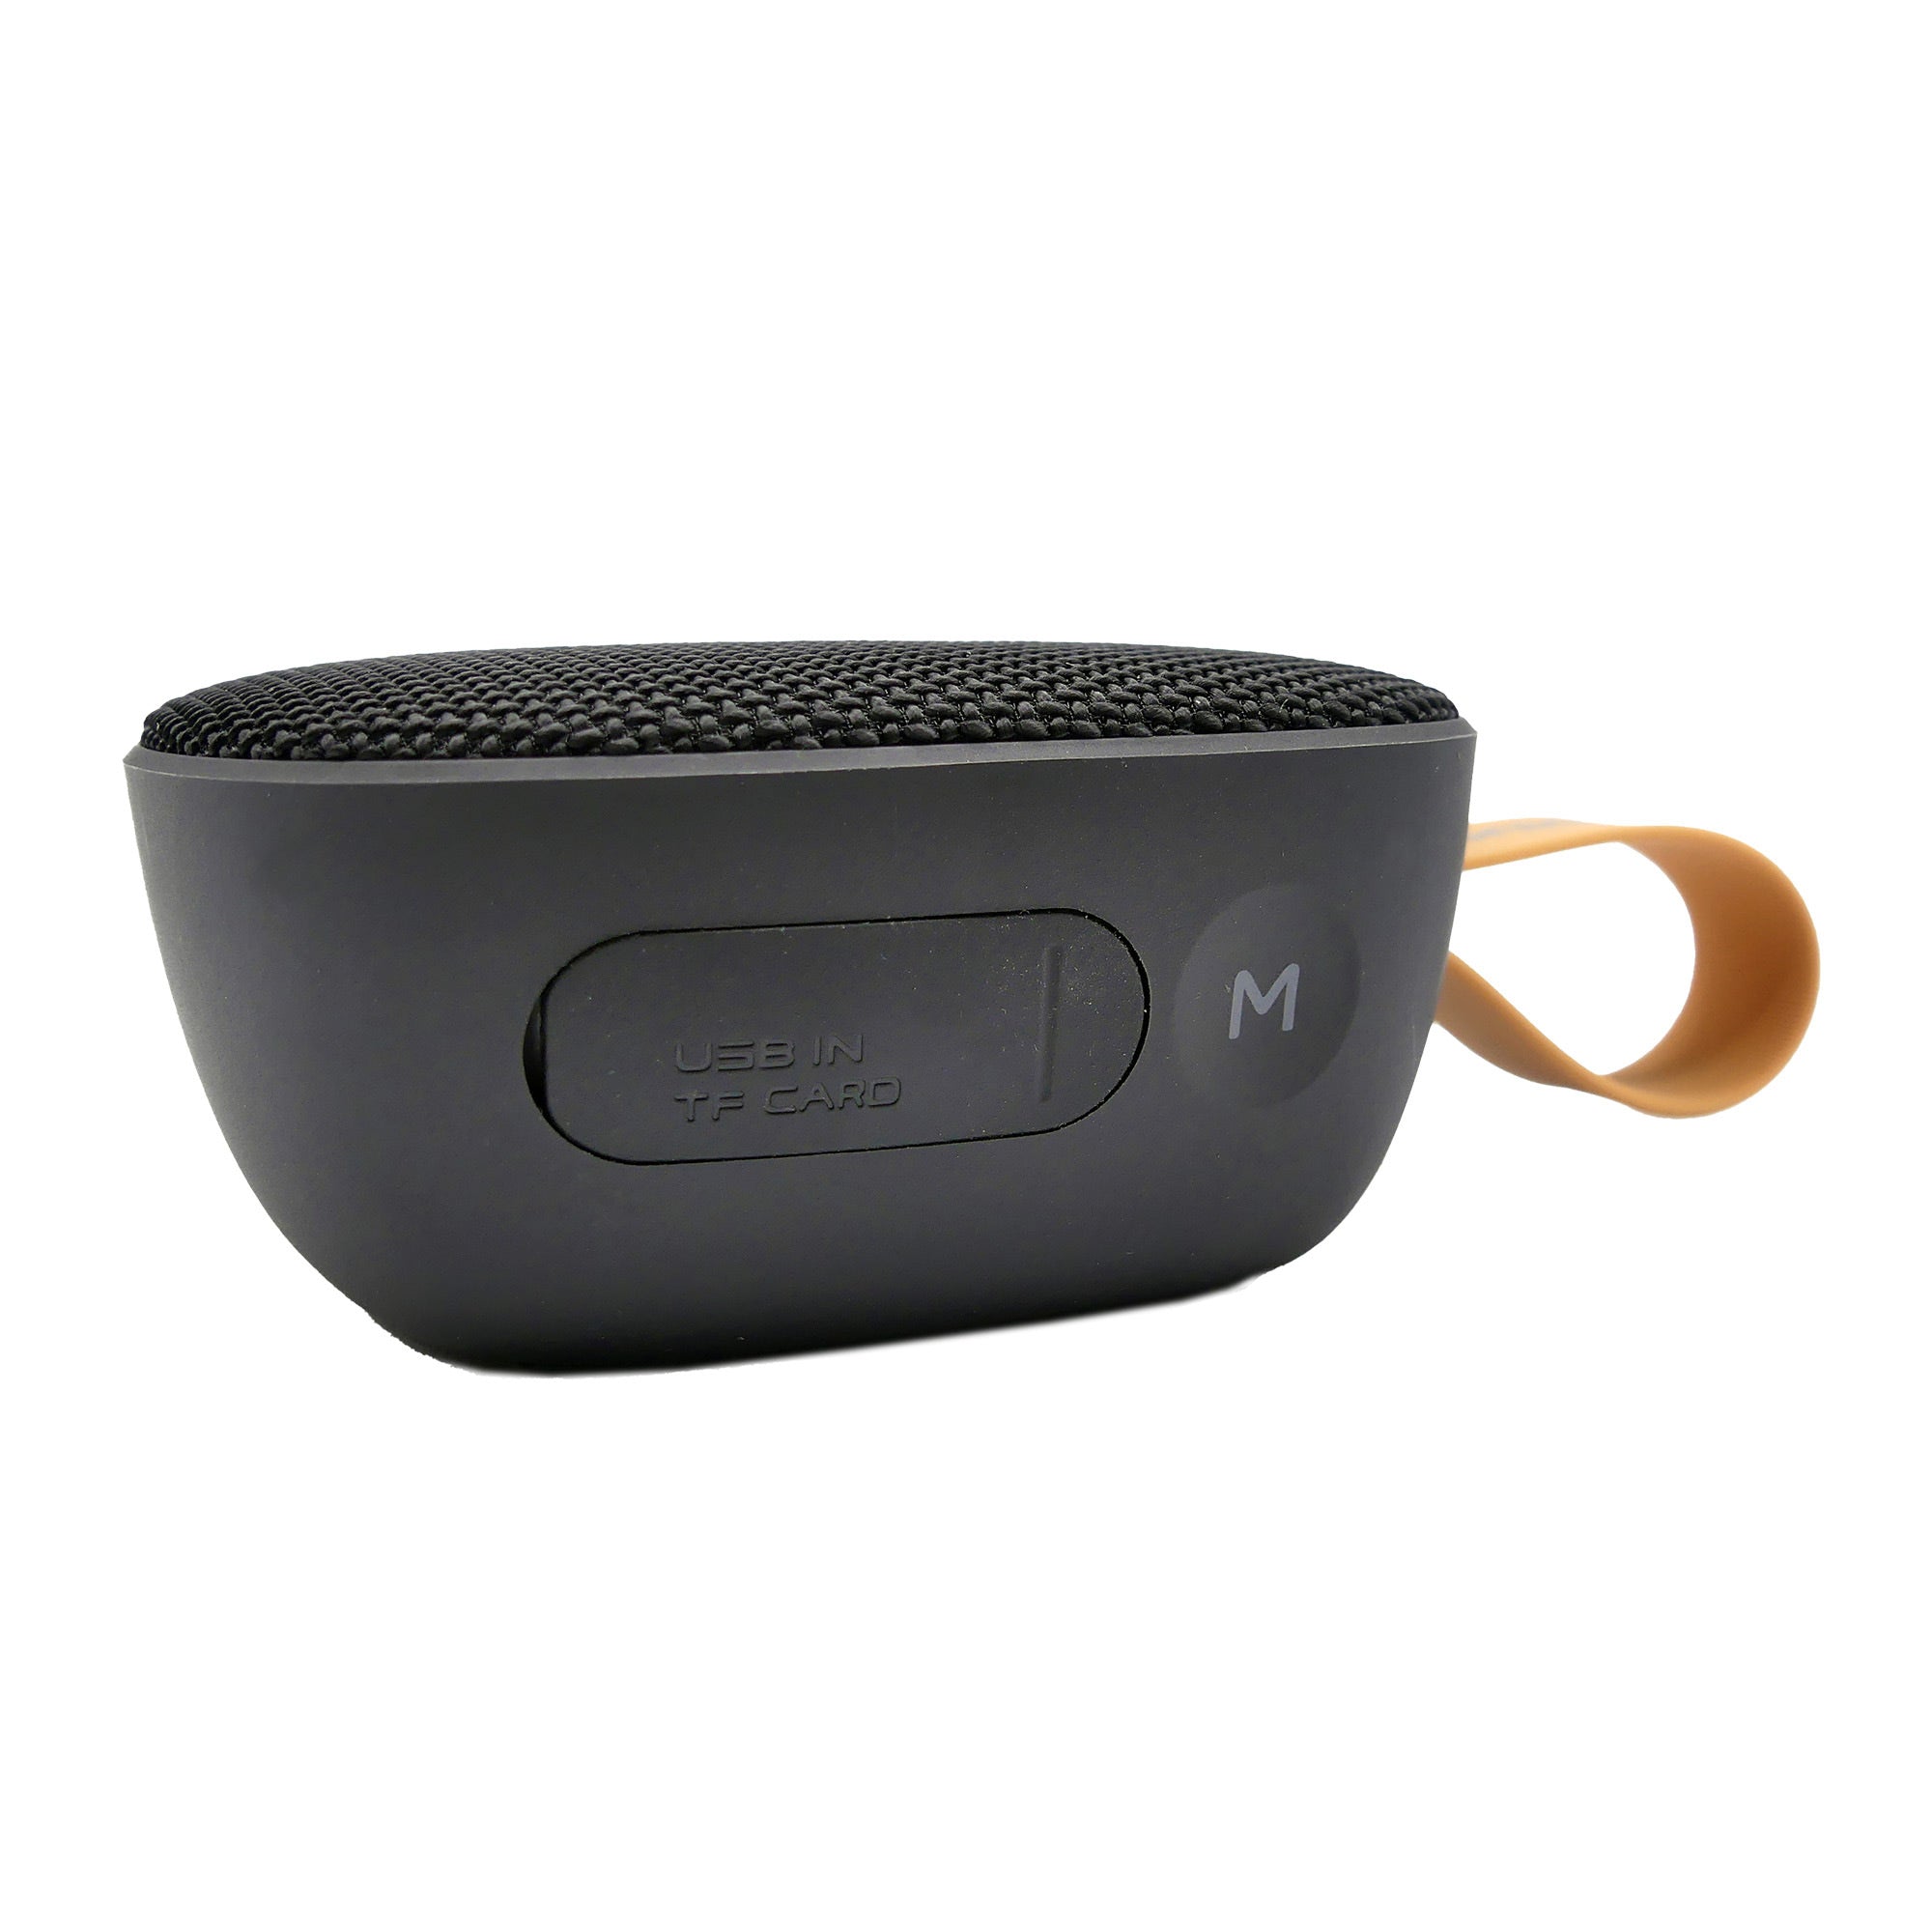 Foniq Solo Portable TWS Bluetooth Speaker with FM mode and SD card input - 15-09439